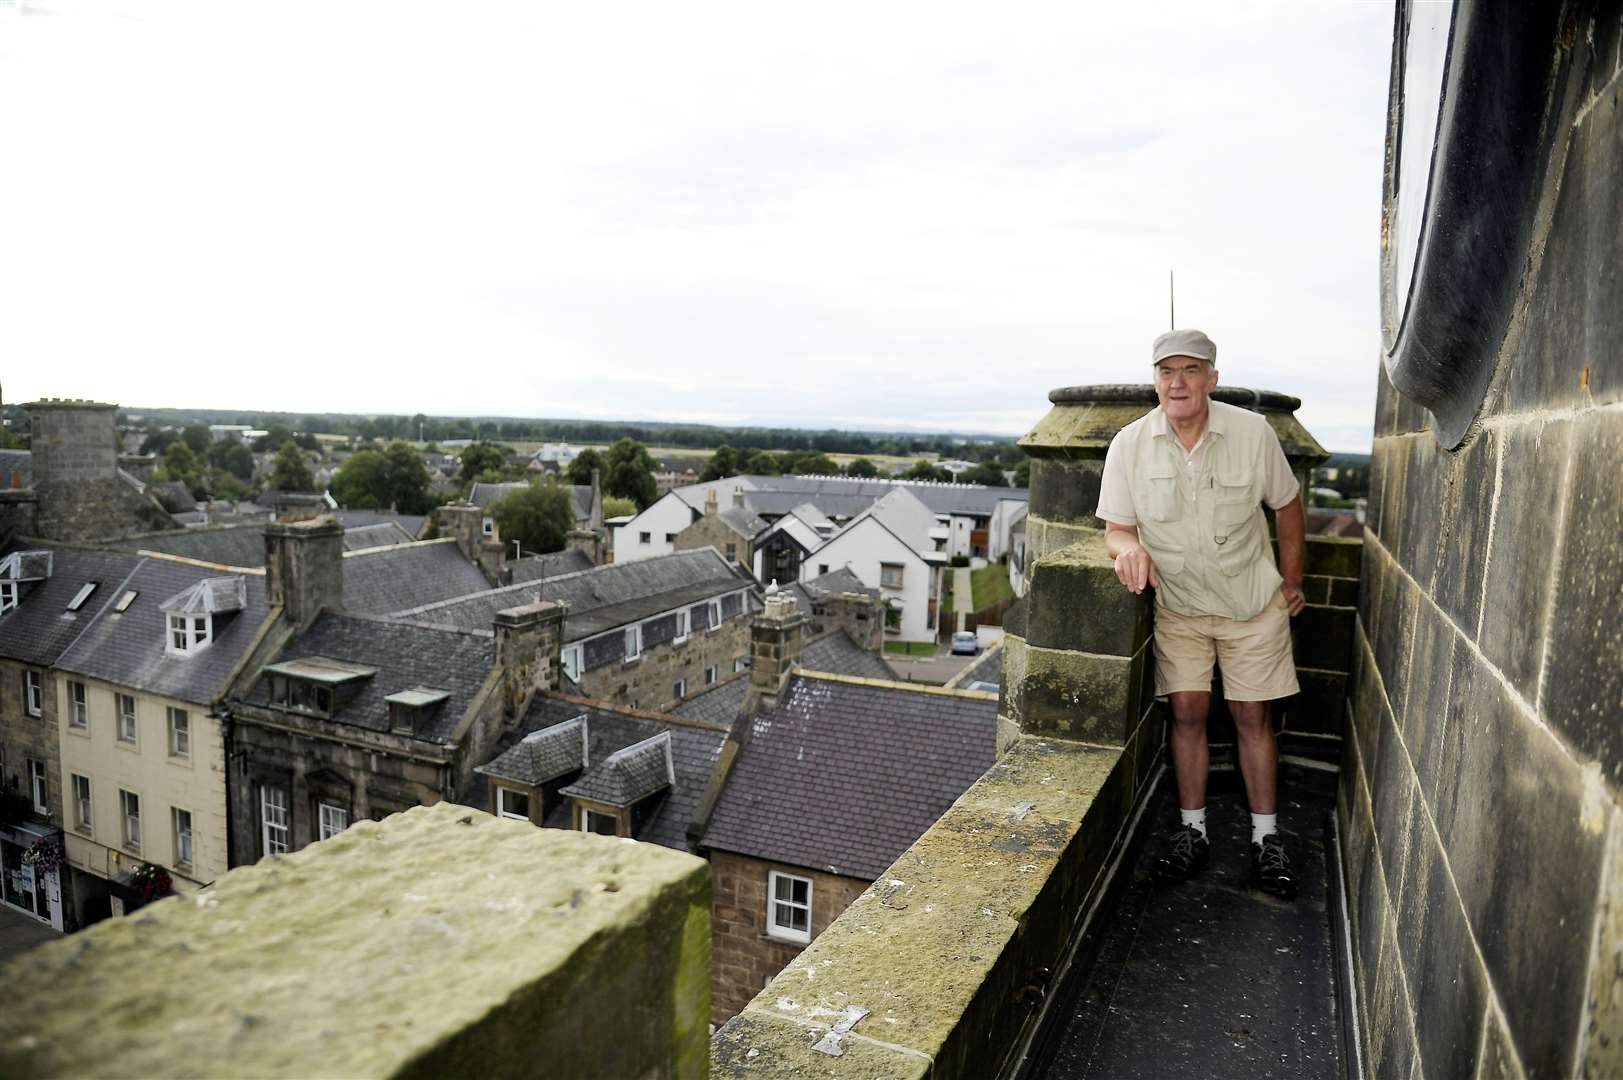 George Alexander on the Tolbooth walkway which is to have safety barriers installed so that visitors can enjoy the 360 degree views of the area it offers.